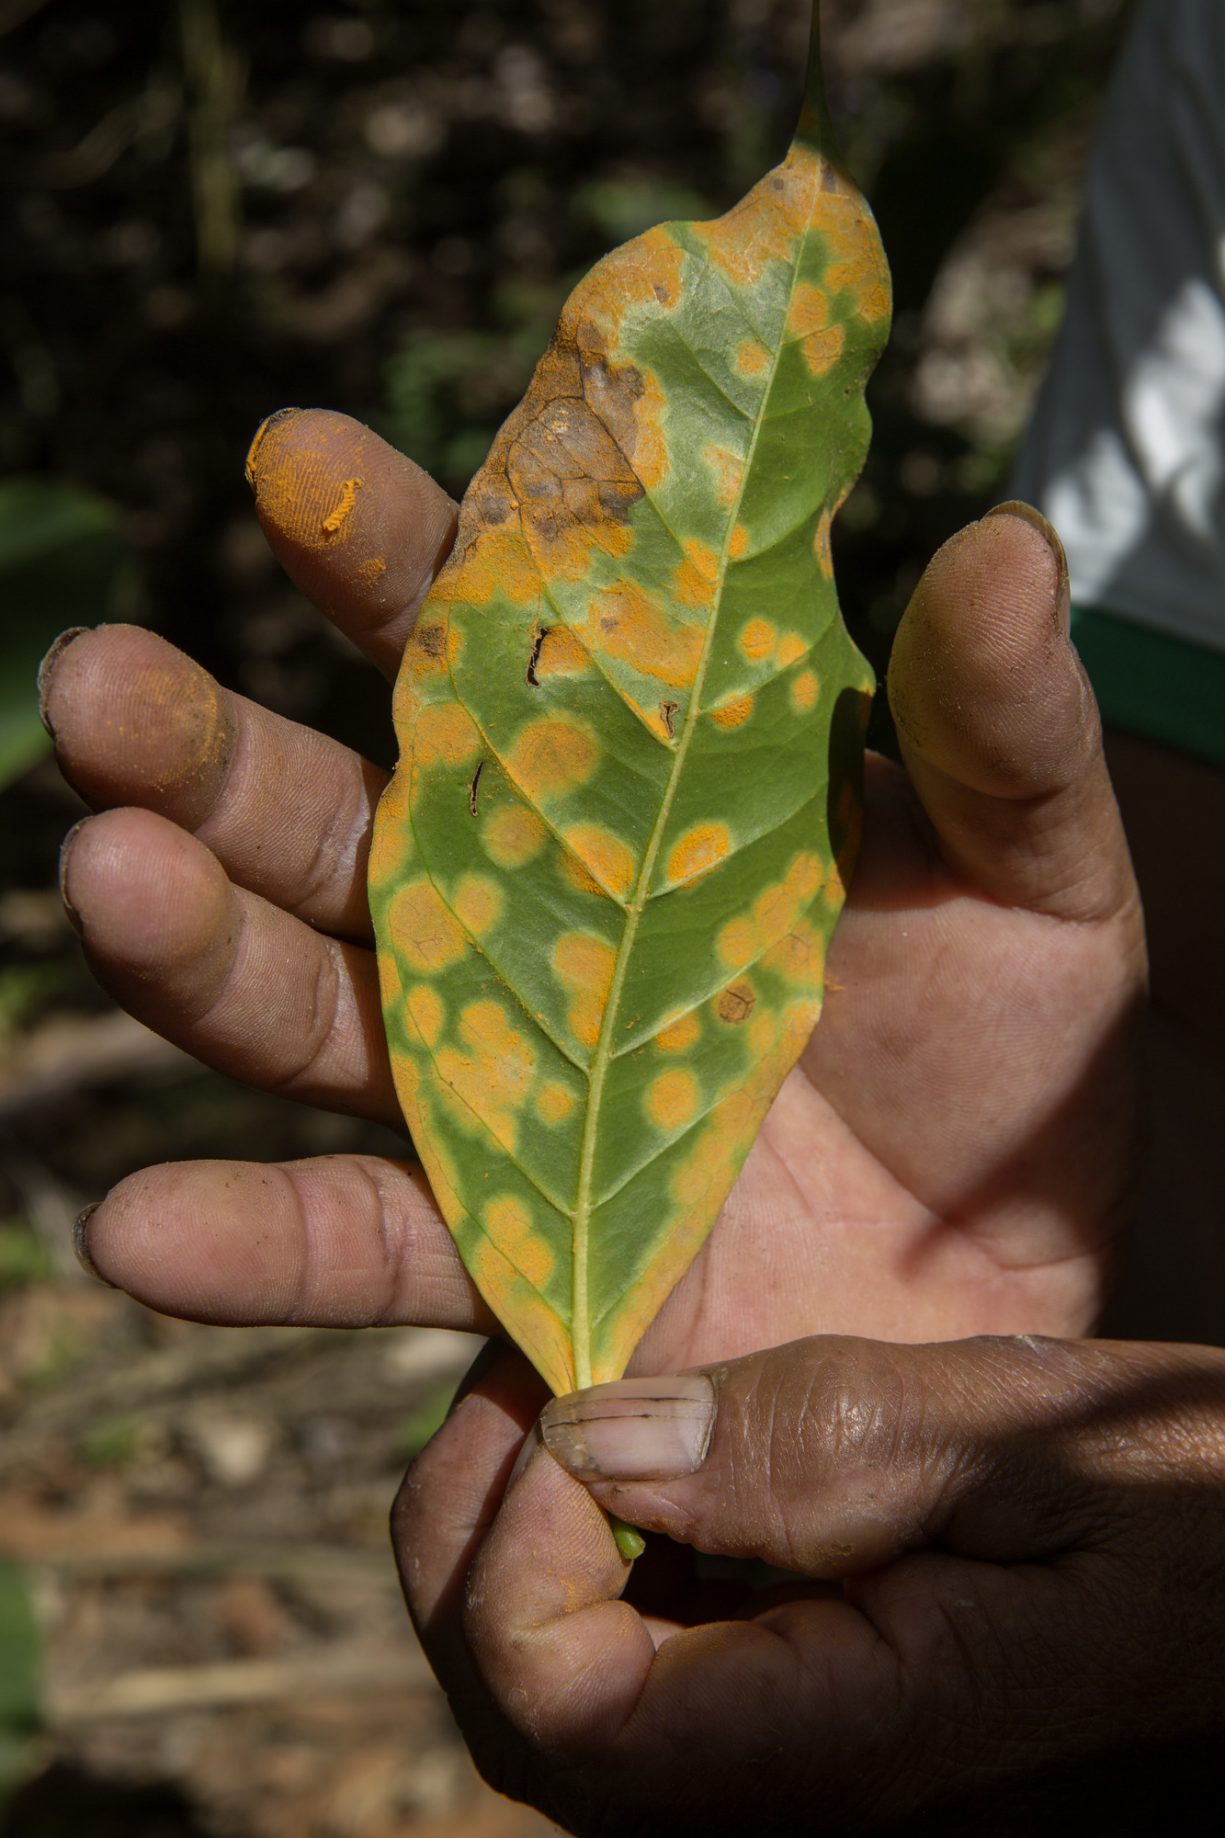 Green leaf with yellow coffee rust